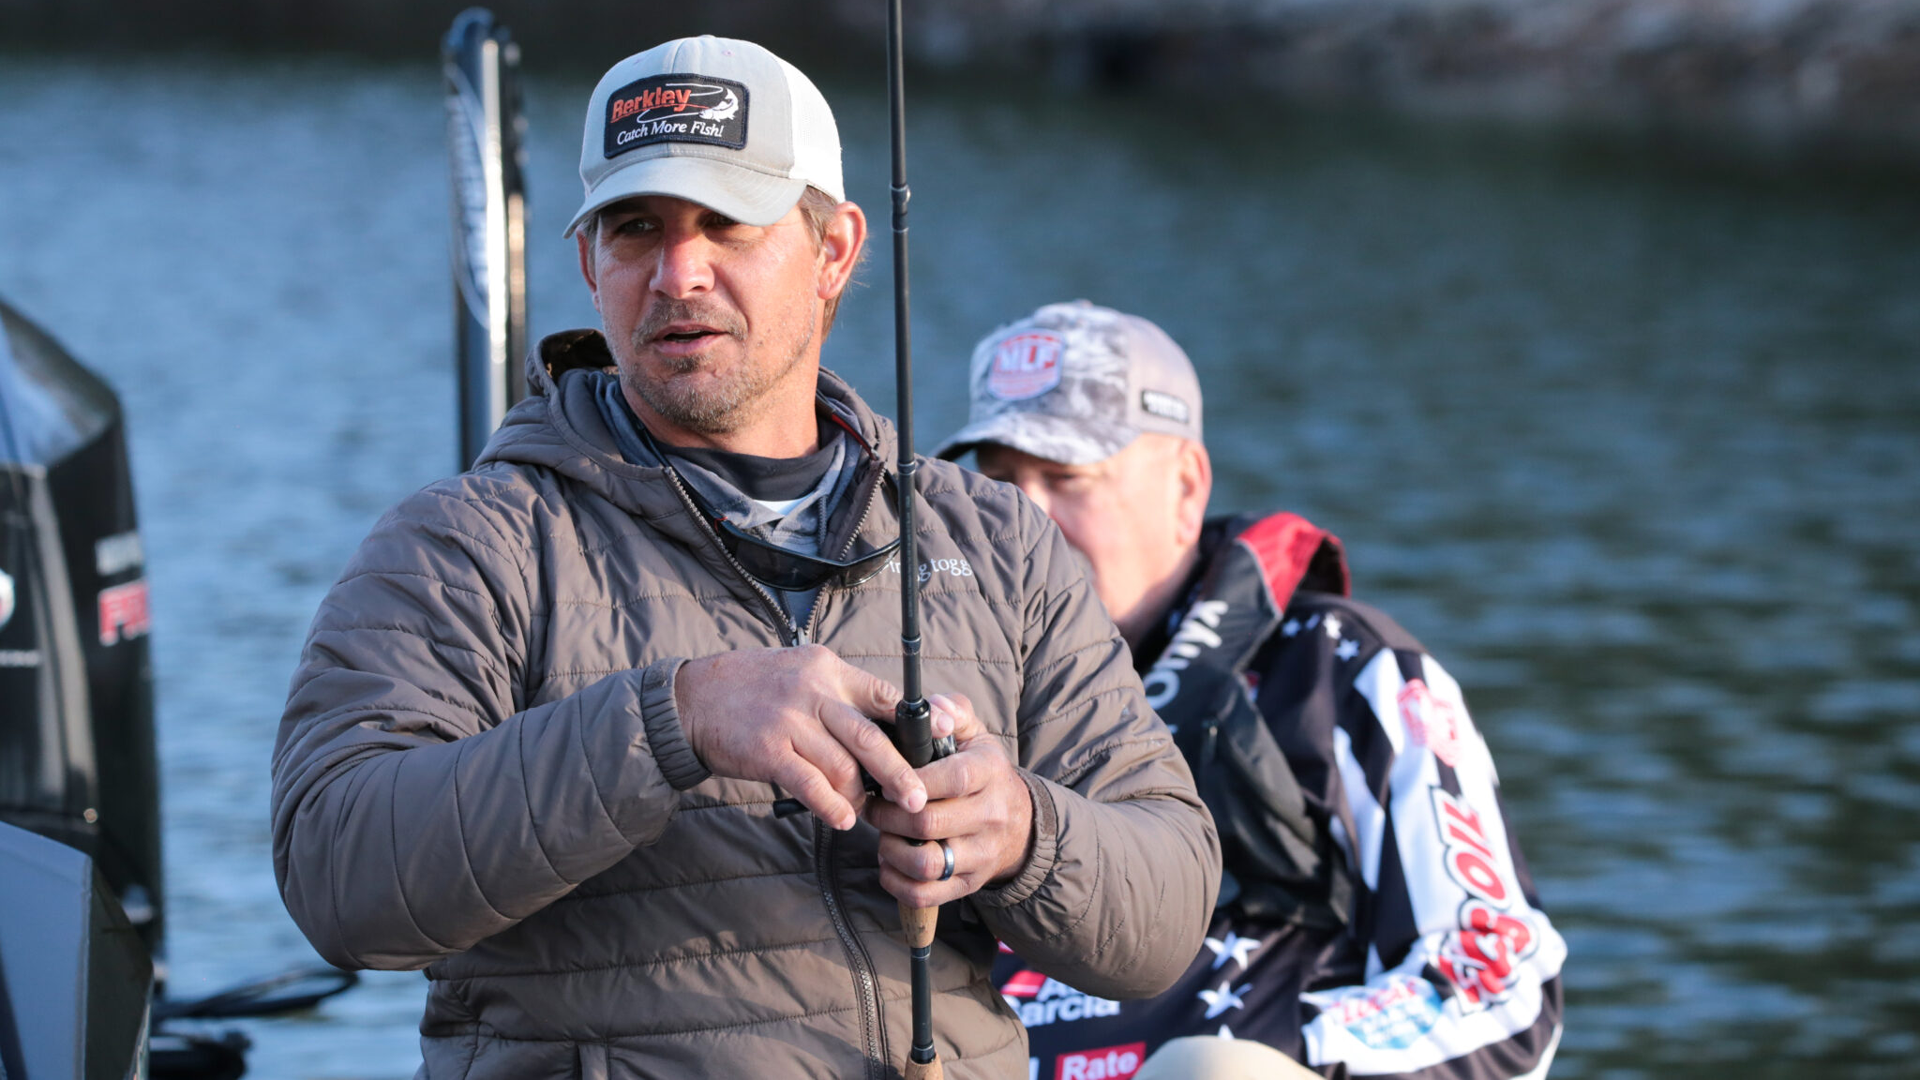 1 BAIT/5 REASONS: Keith Poche Prefers The General's Versatility